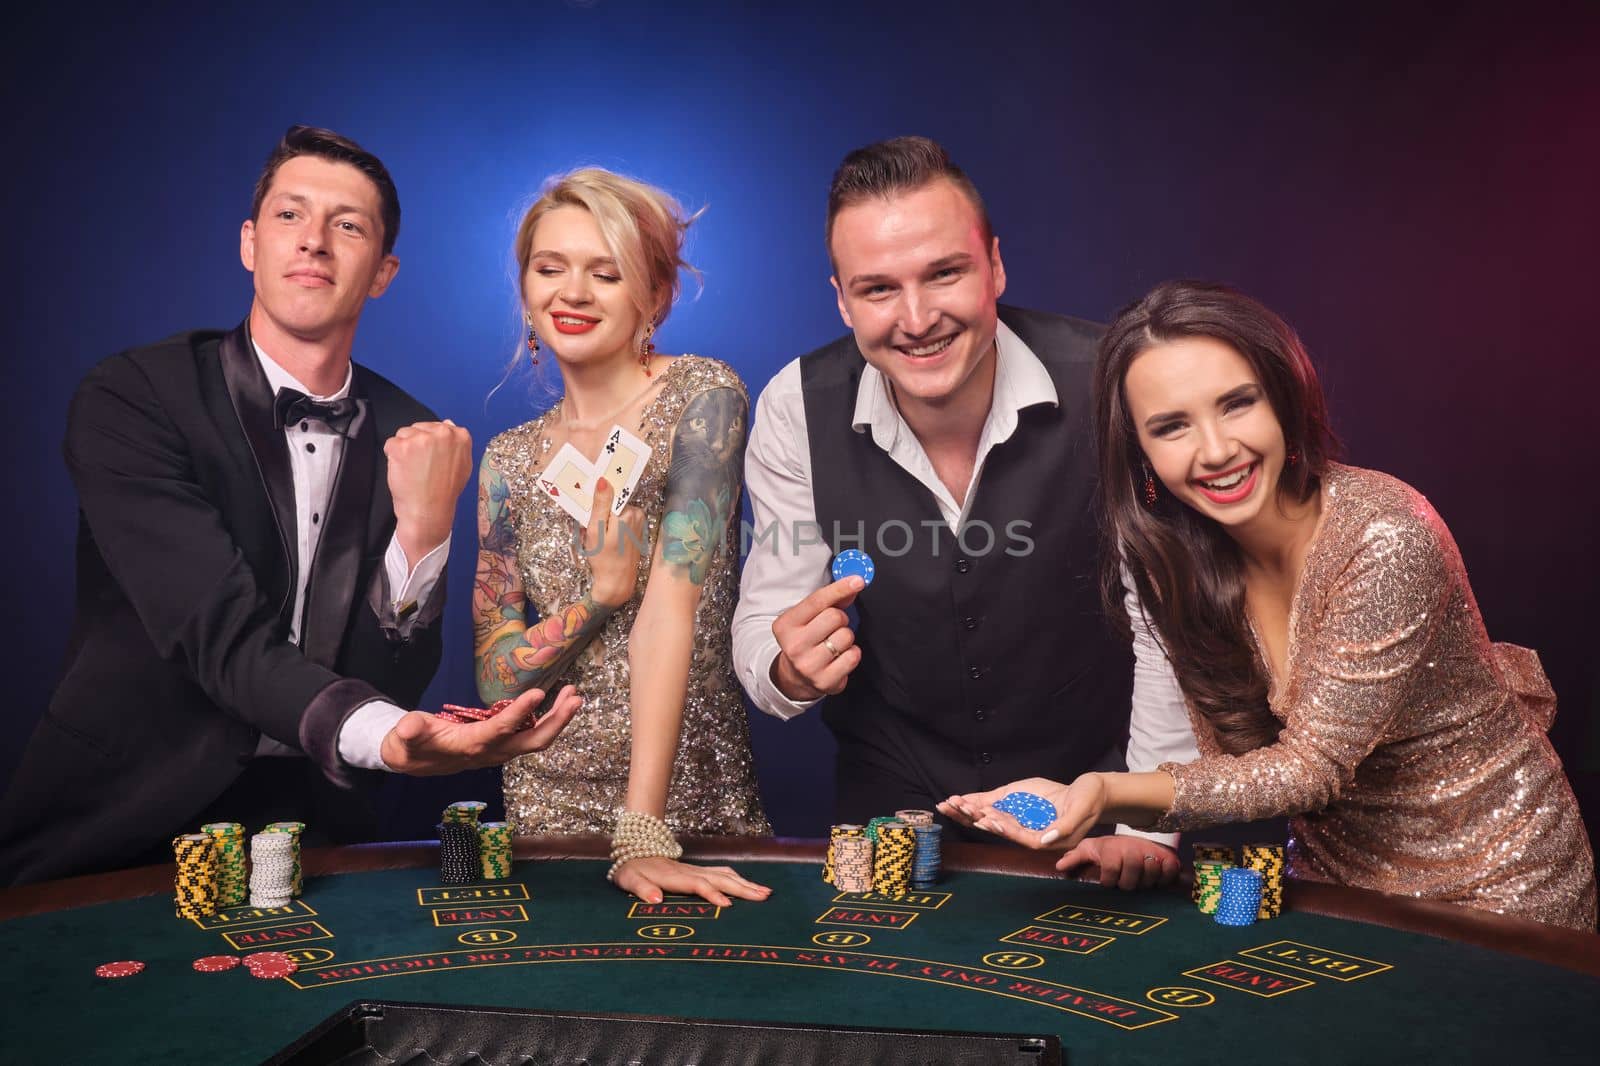 Group of an excited rich buddies are playing poker at casino. Youth are making bets waiting for a big win. They are smiling standing at the table against a red and blue backlights on black background. Risky gambling entertainment.